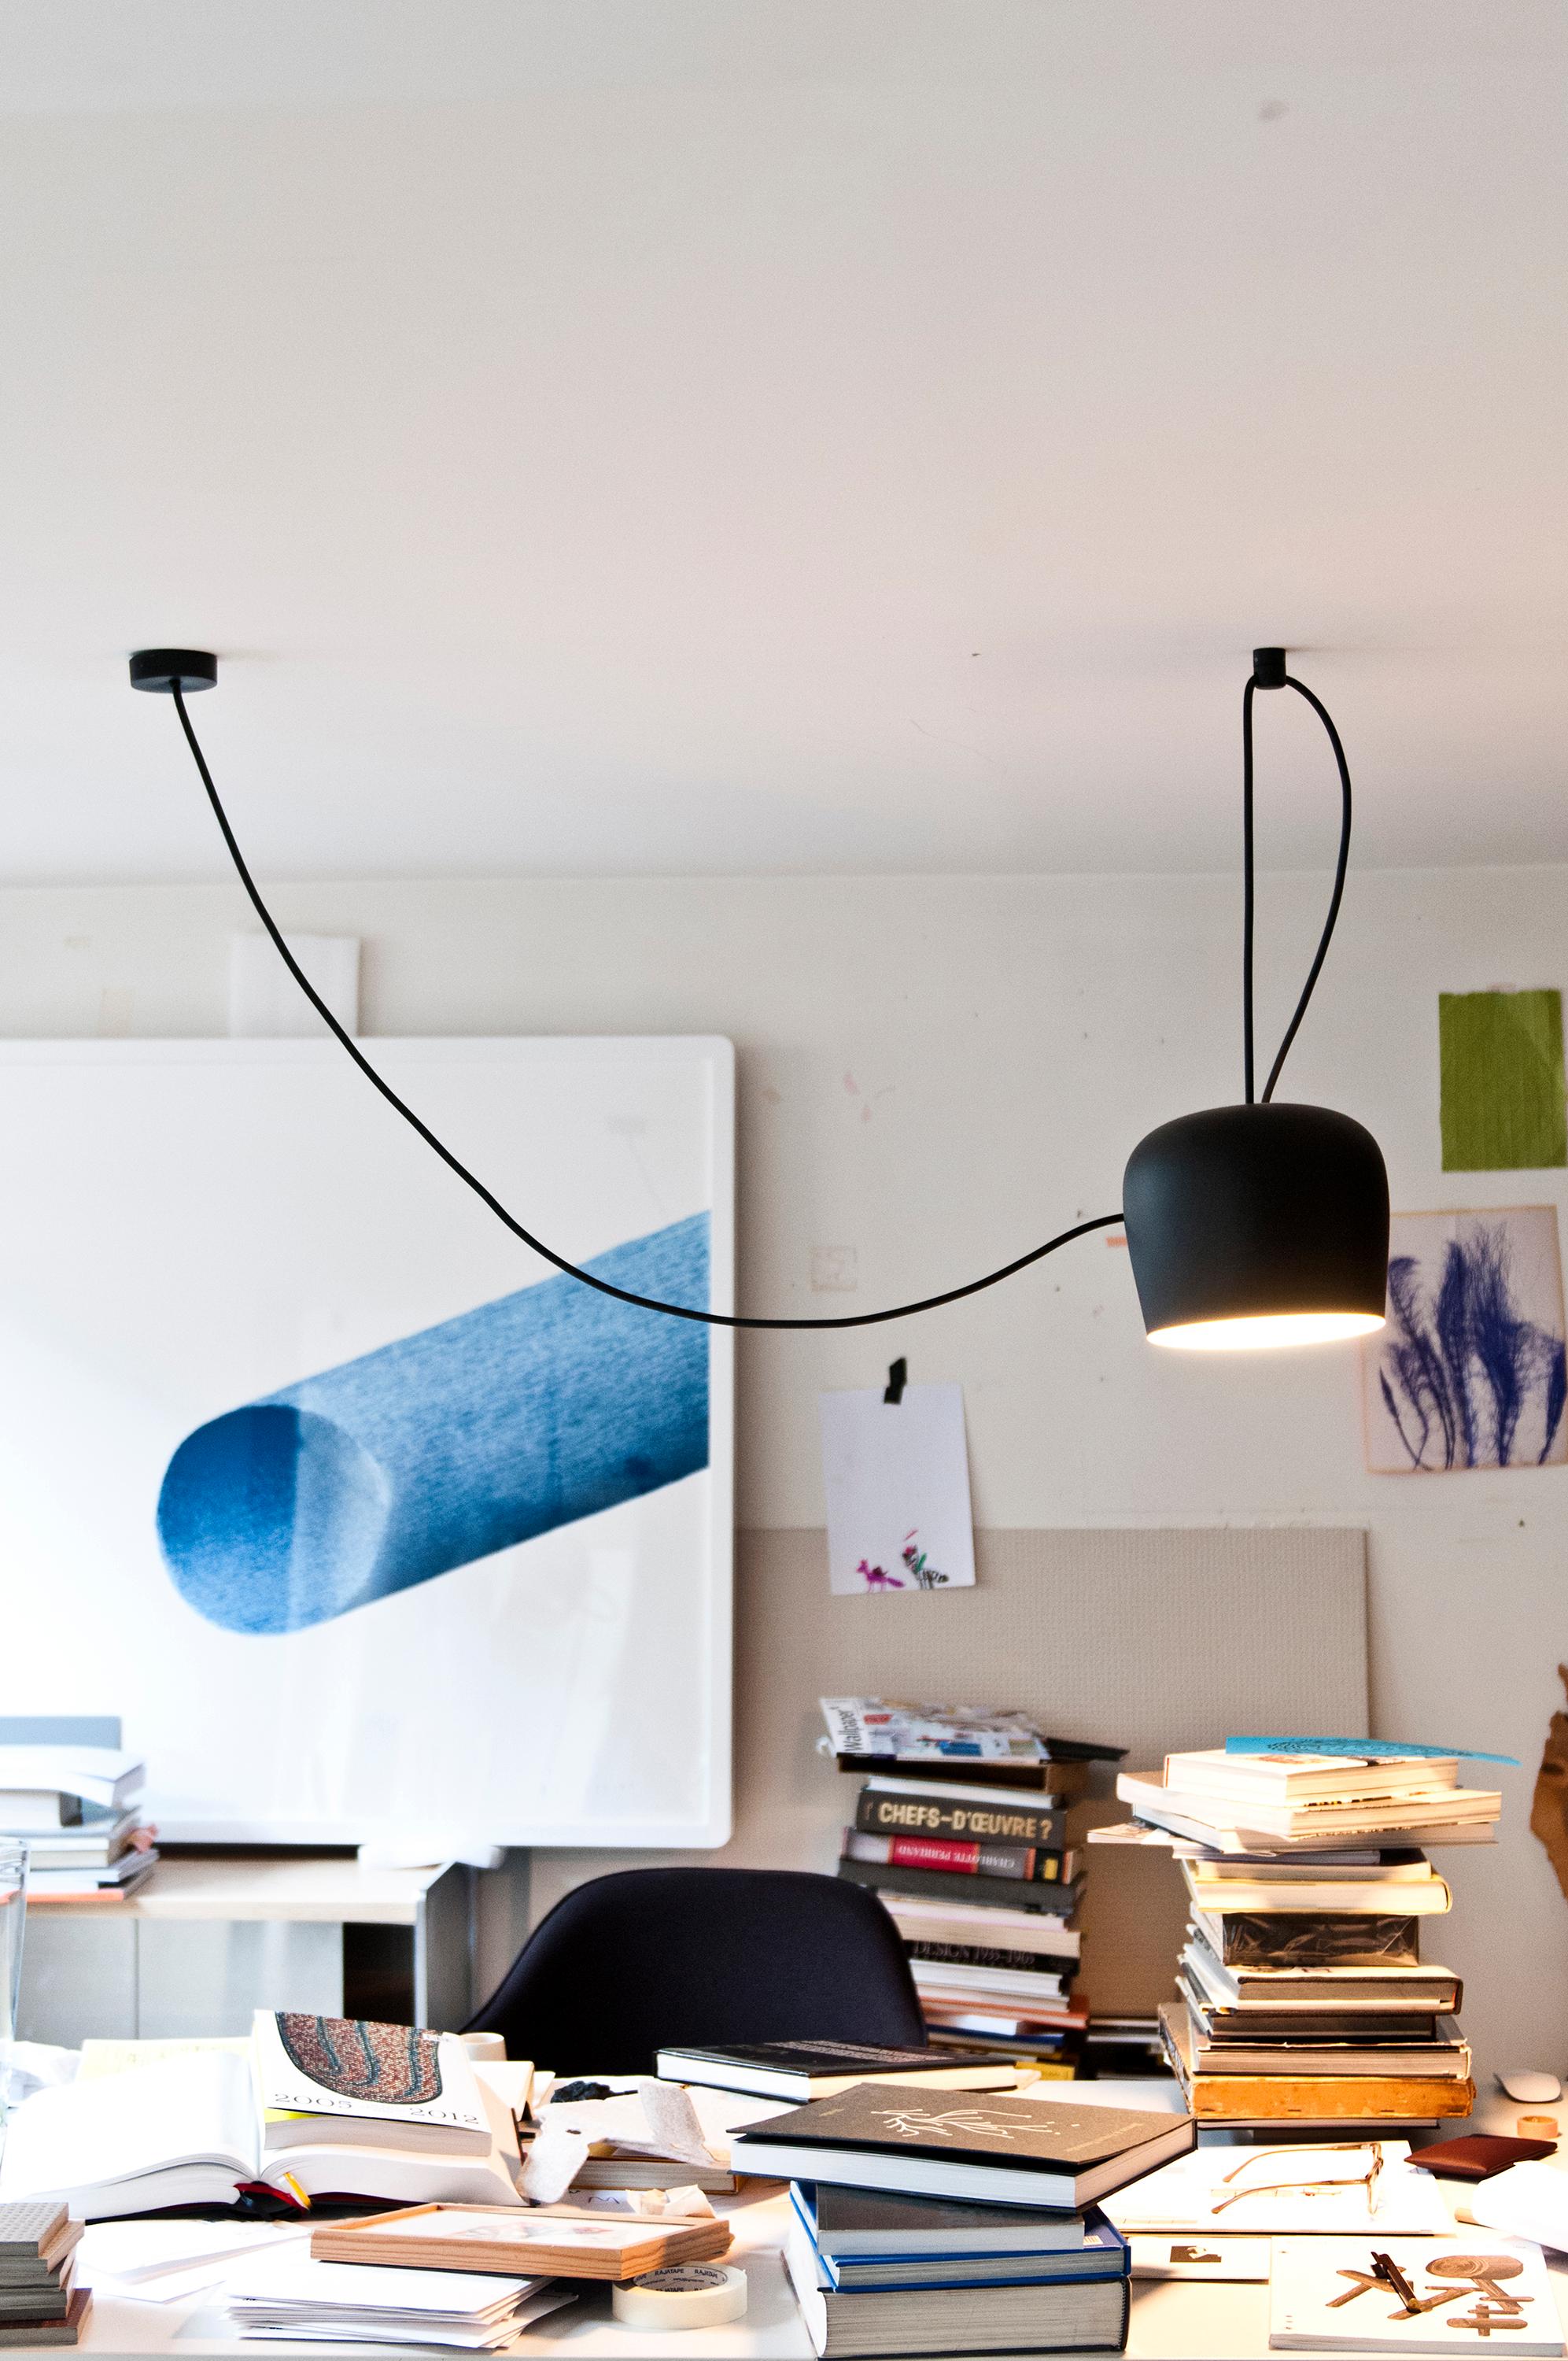 FLOS AIM Small Pendant Light in Bronze by Ronan & Erwan Bouroullec

Like the others in the AIM family created by the Bouroullec brothers in 2010, the AIM-Small ceiling light is a design stripped to its most basic—and beautiful—essence. This